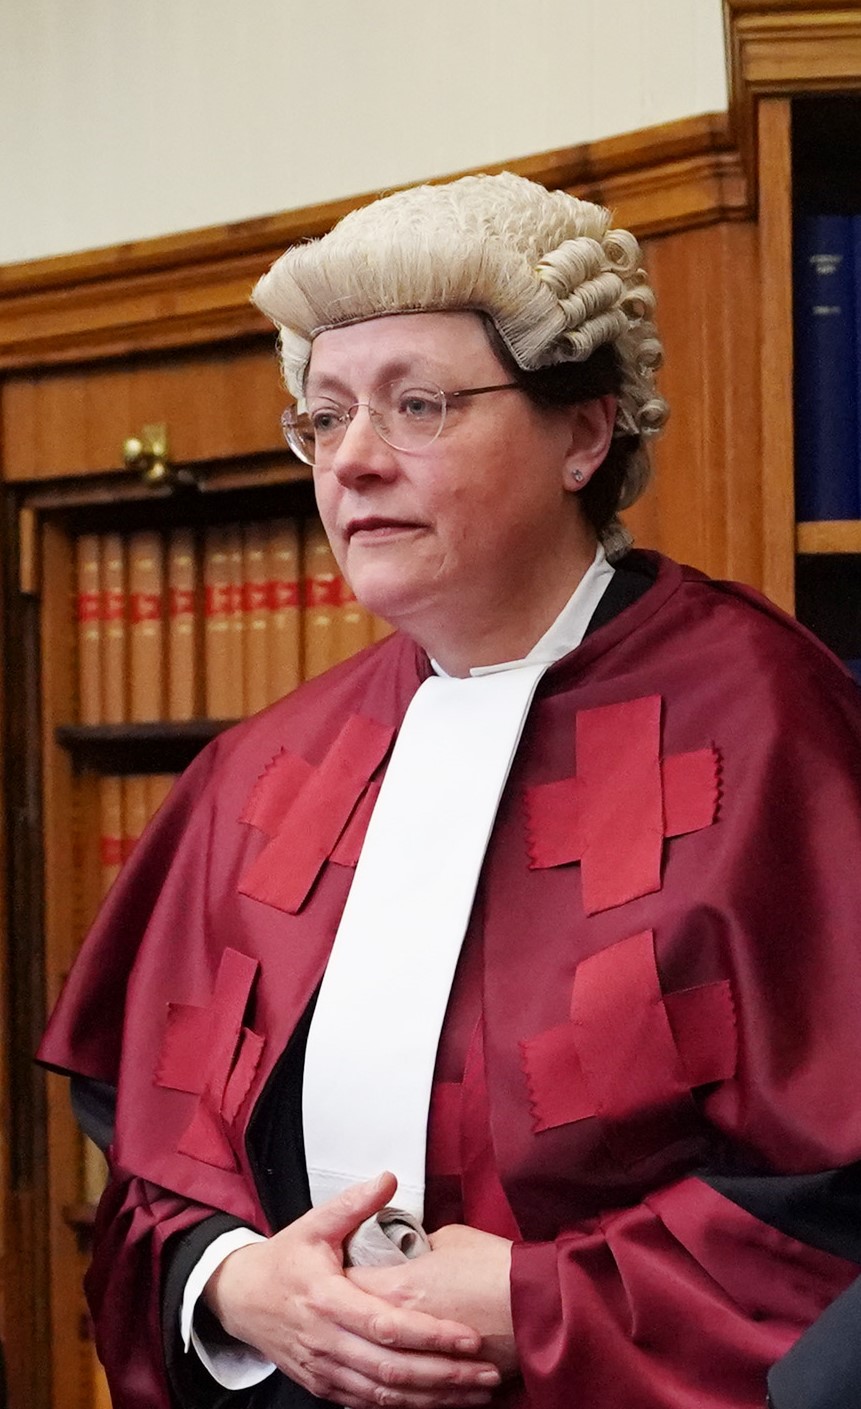 Lady Ross installed as a judge of the supreme court